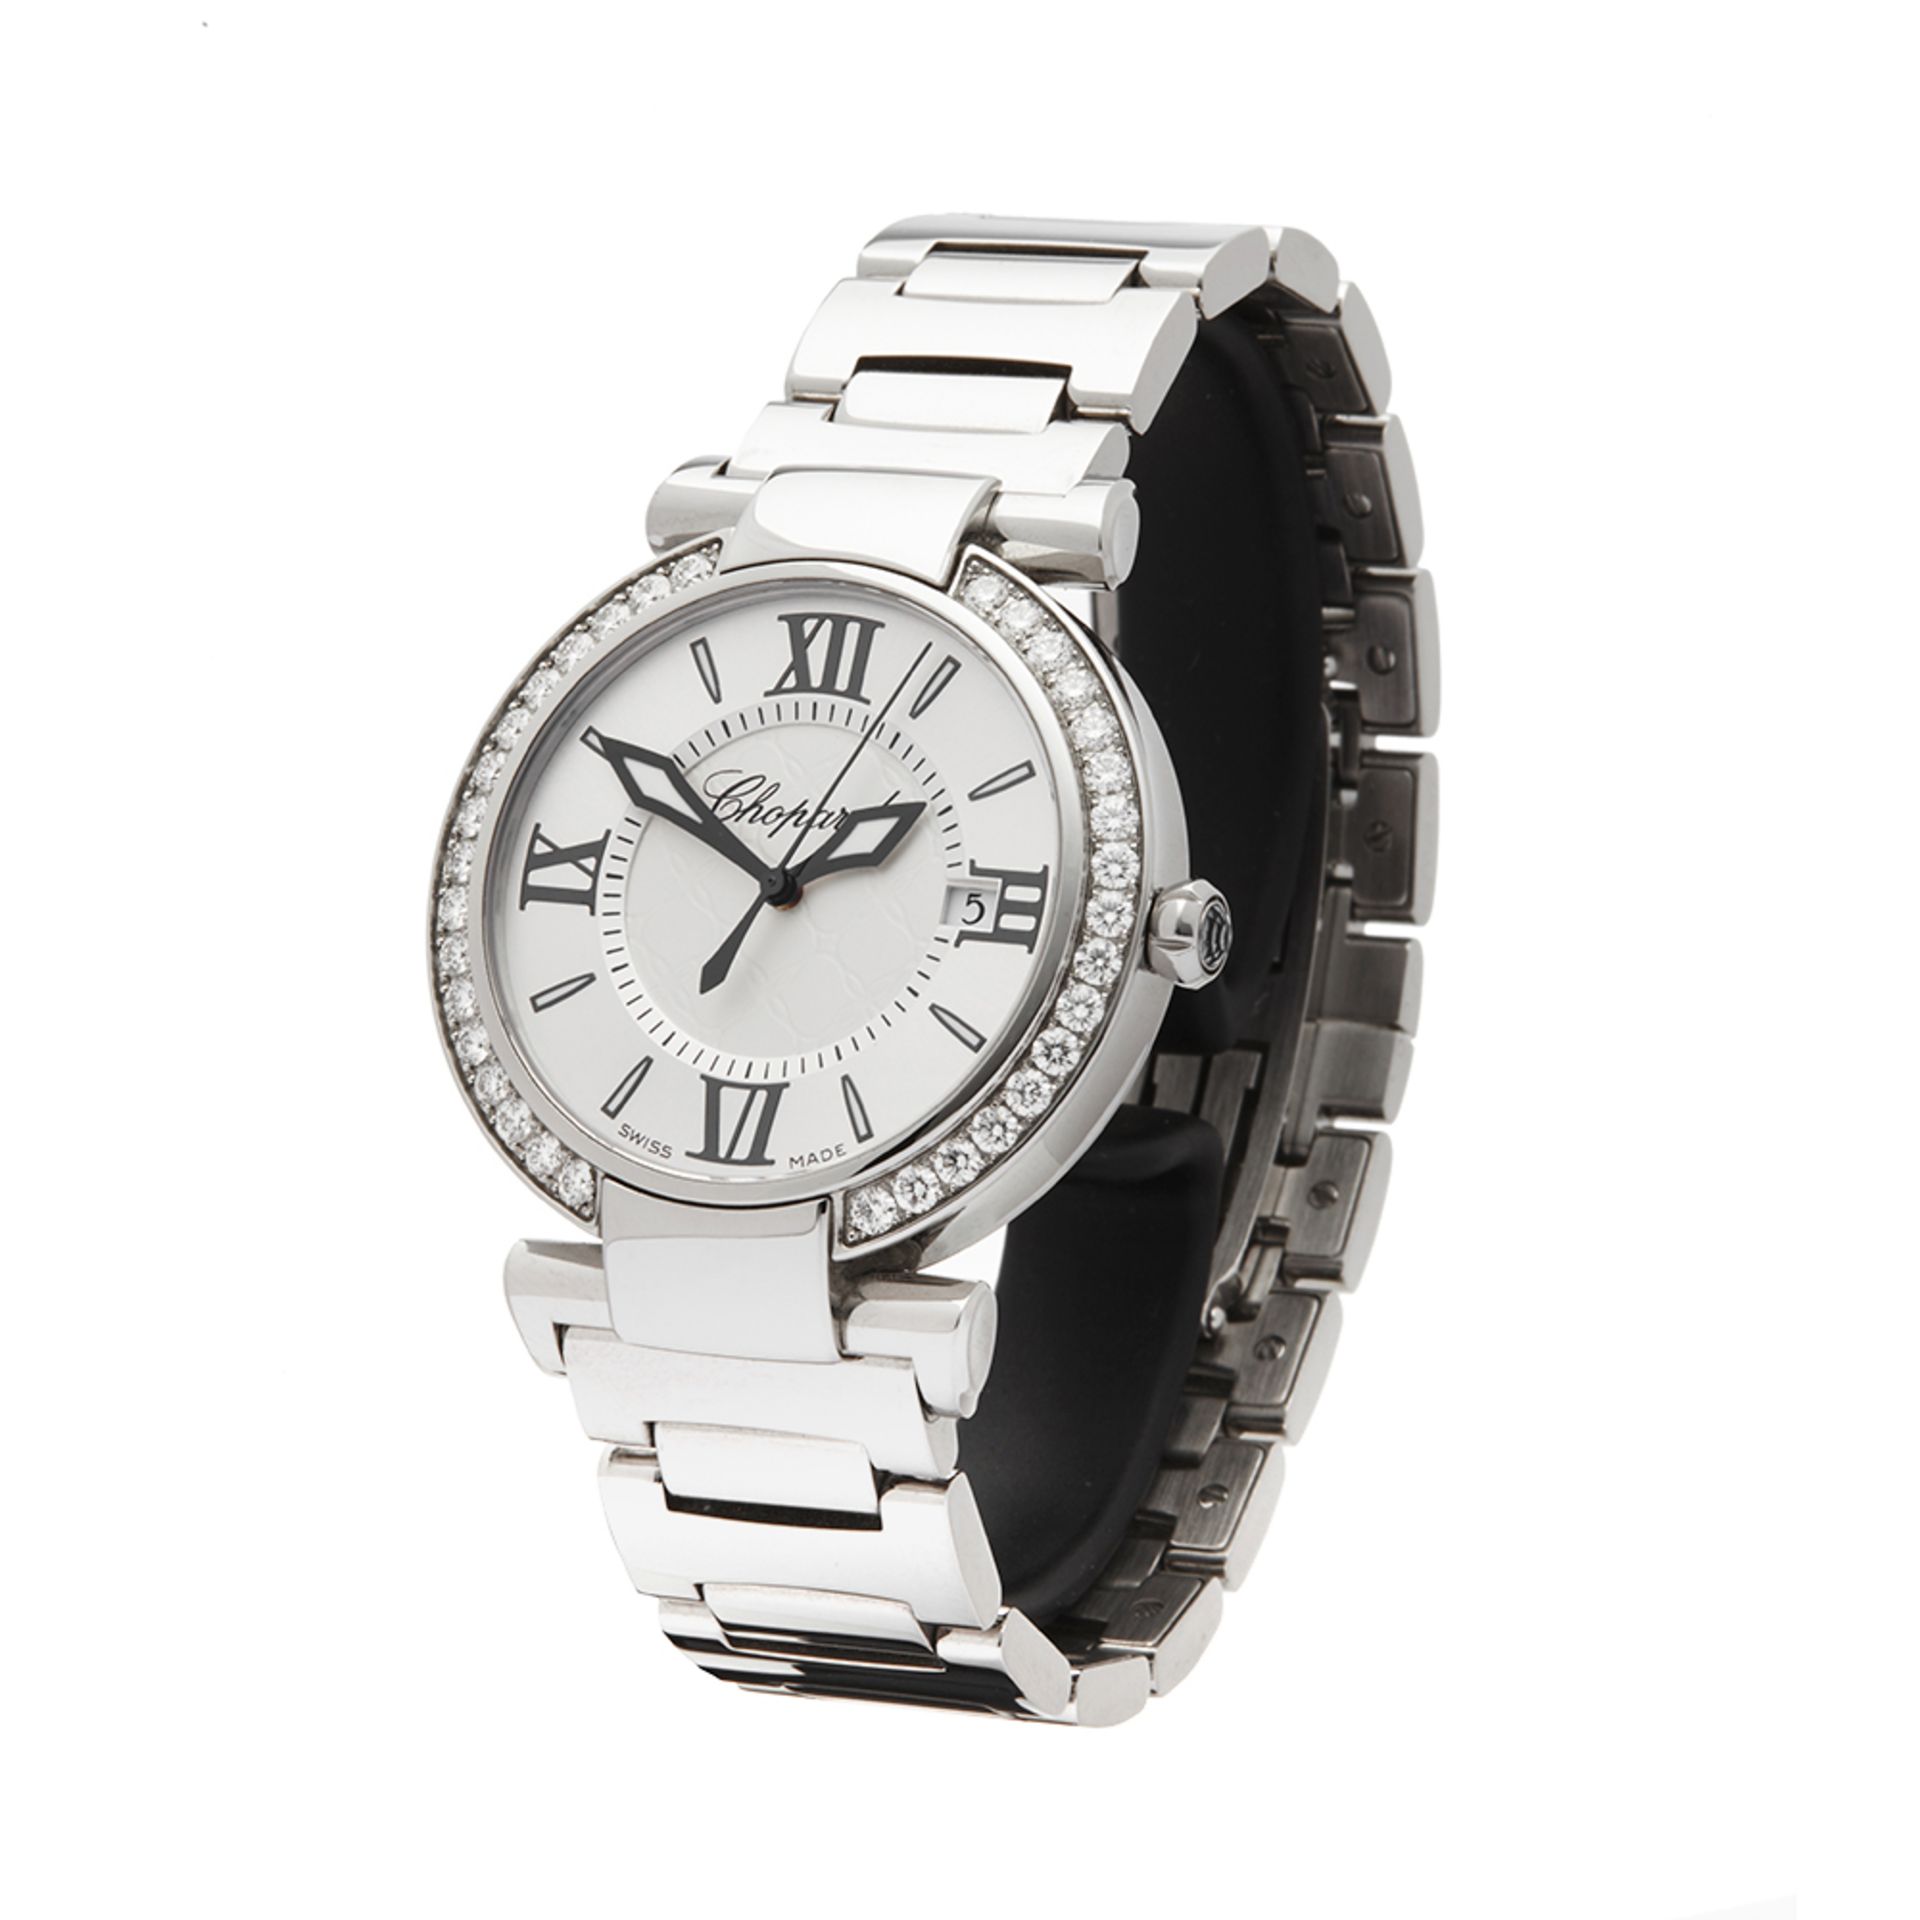 Chopard Imperiale Stainless Steel - 388532-3004 - Image 3 of 8